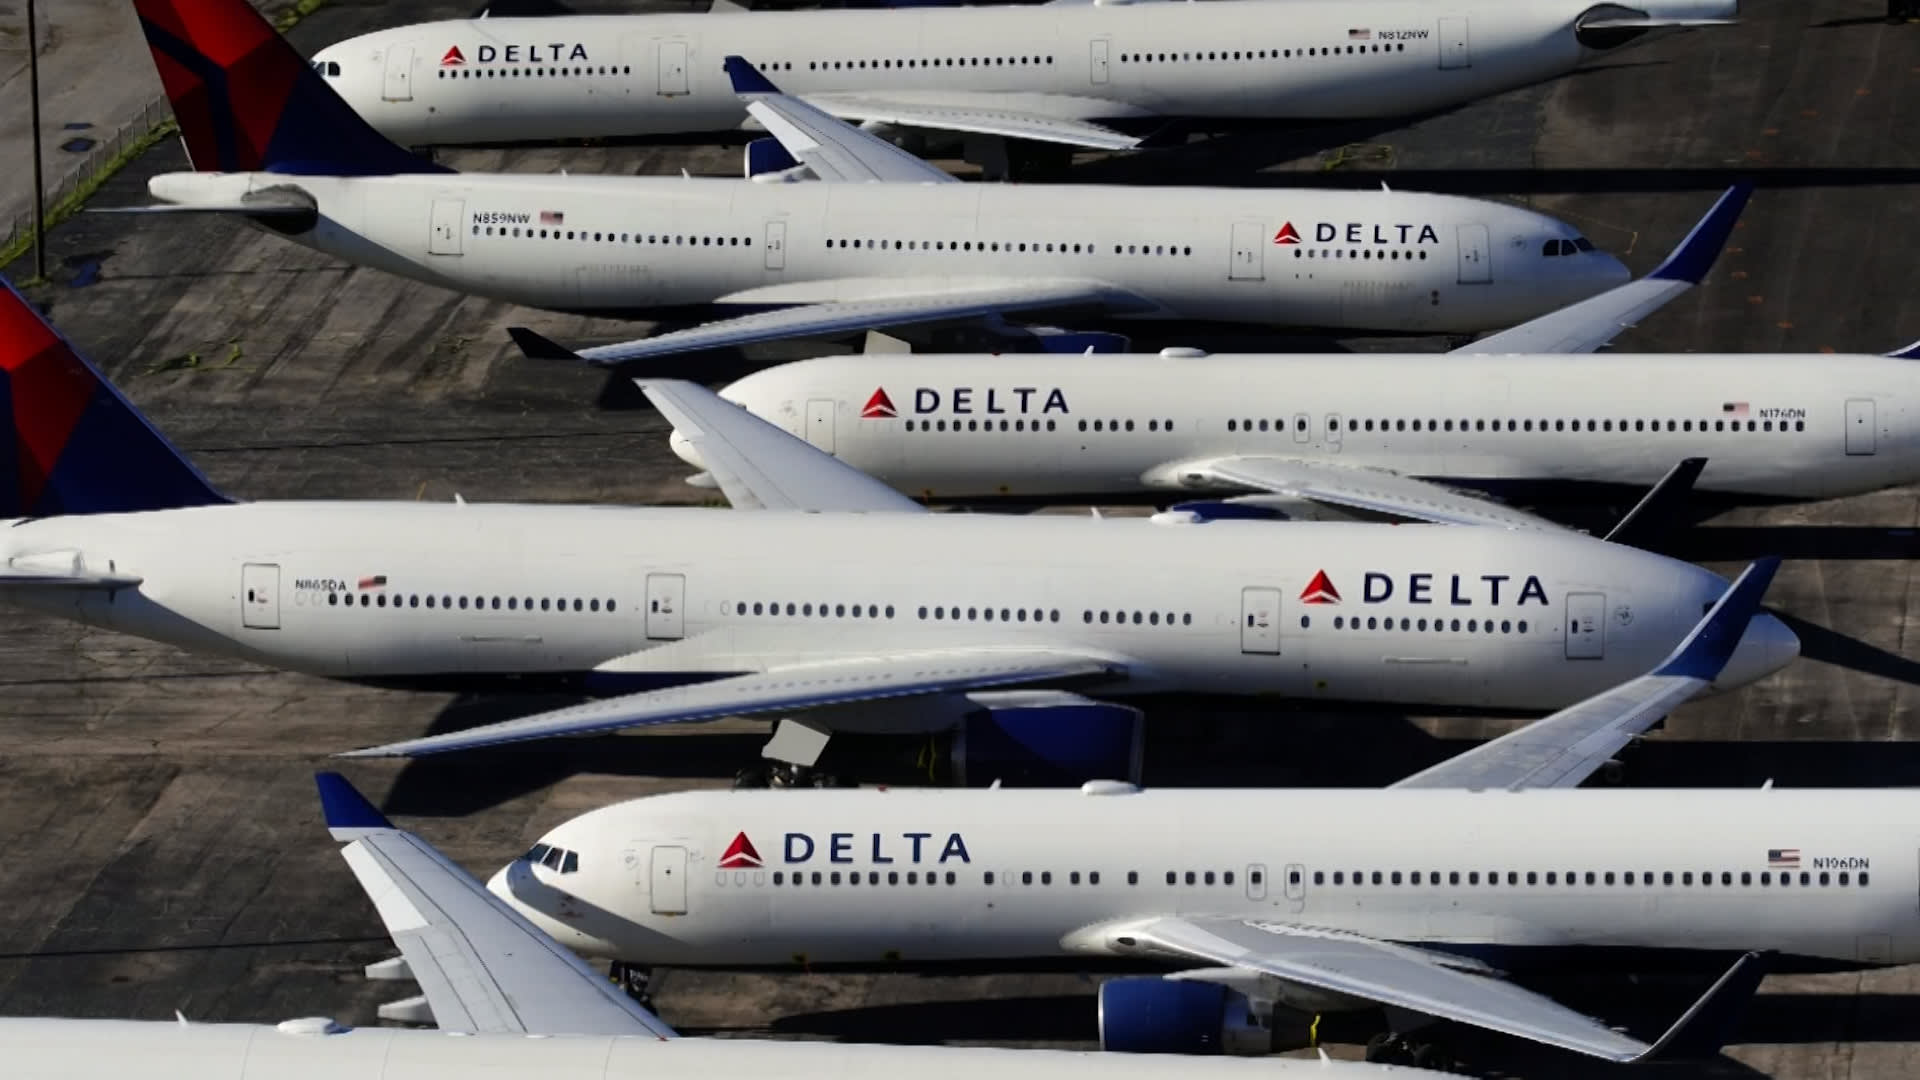 Delta Air Lines planes are grounded during coronavirus.